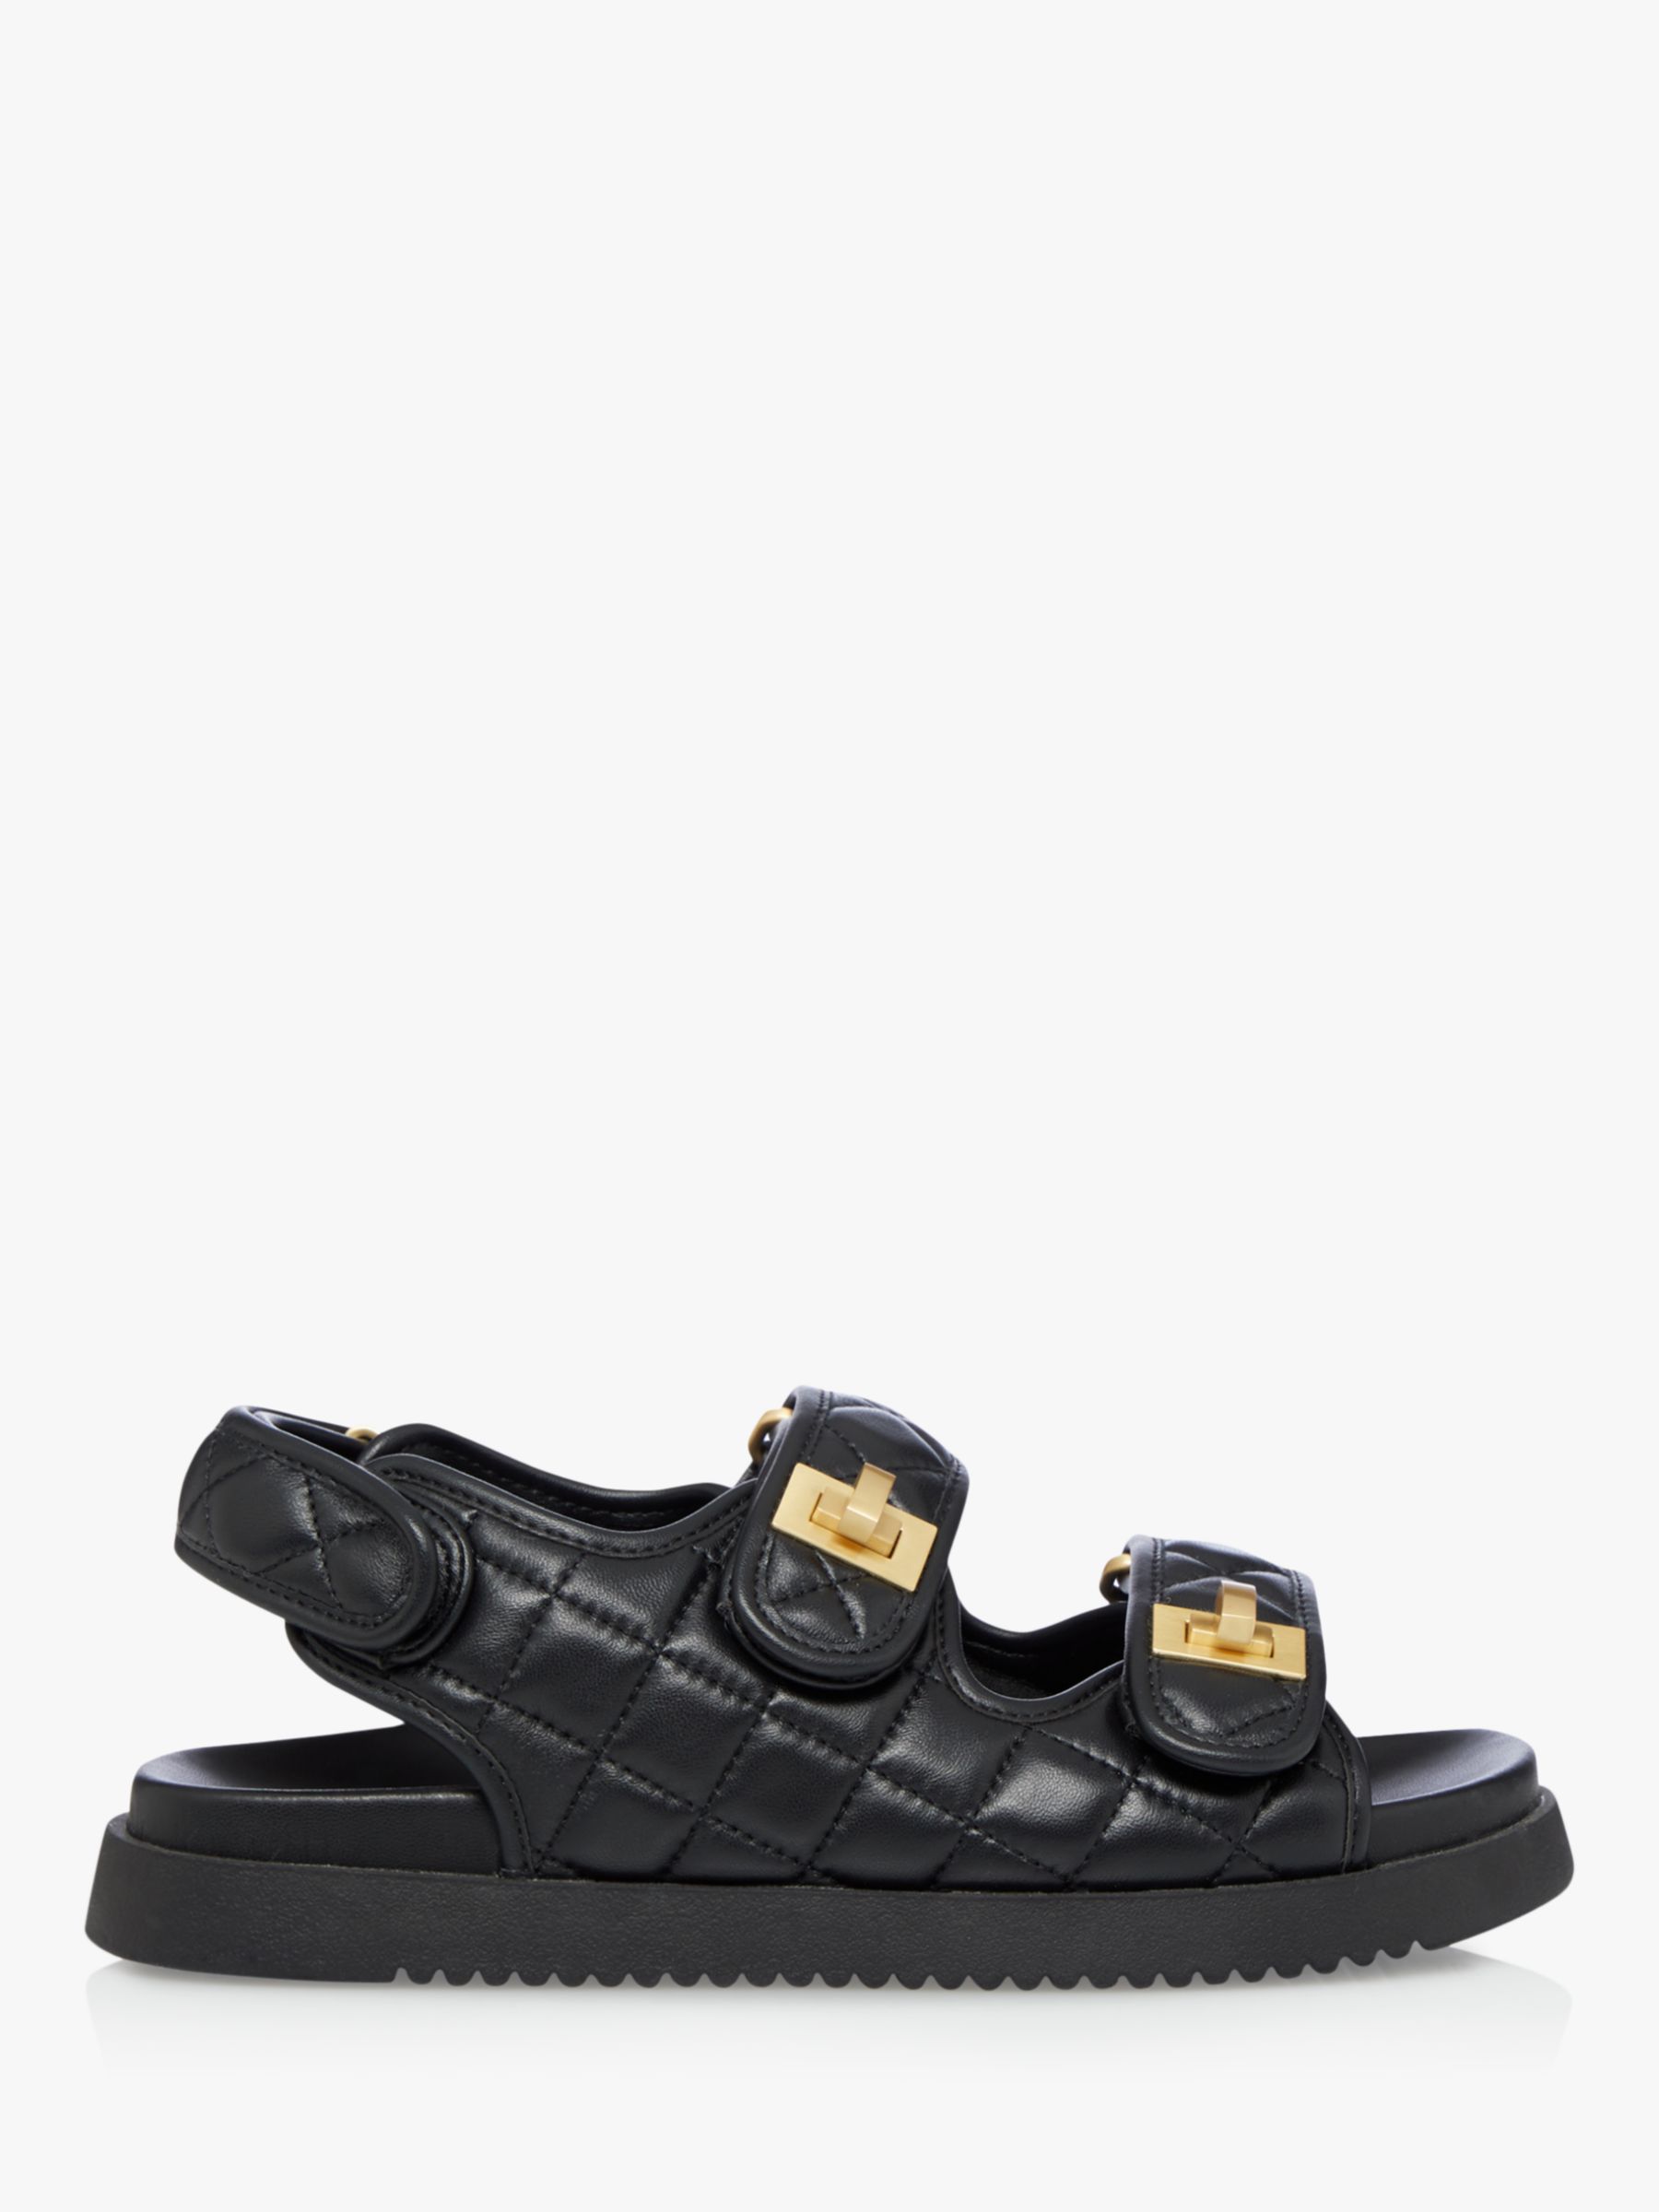 Dune Lockstock Leather Double Strap Sandals, Black at John Lewis & Partners